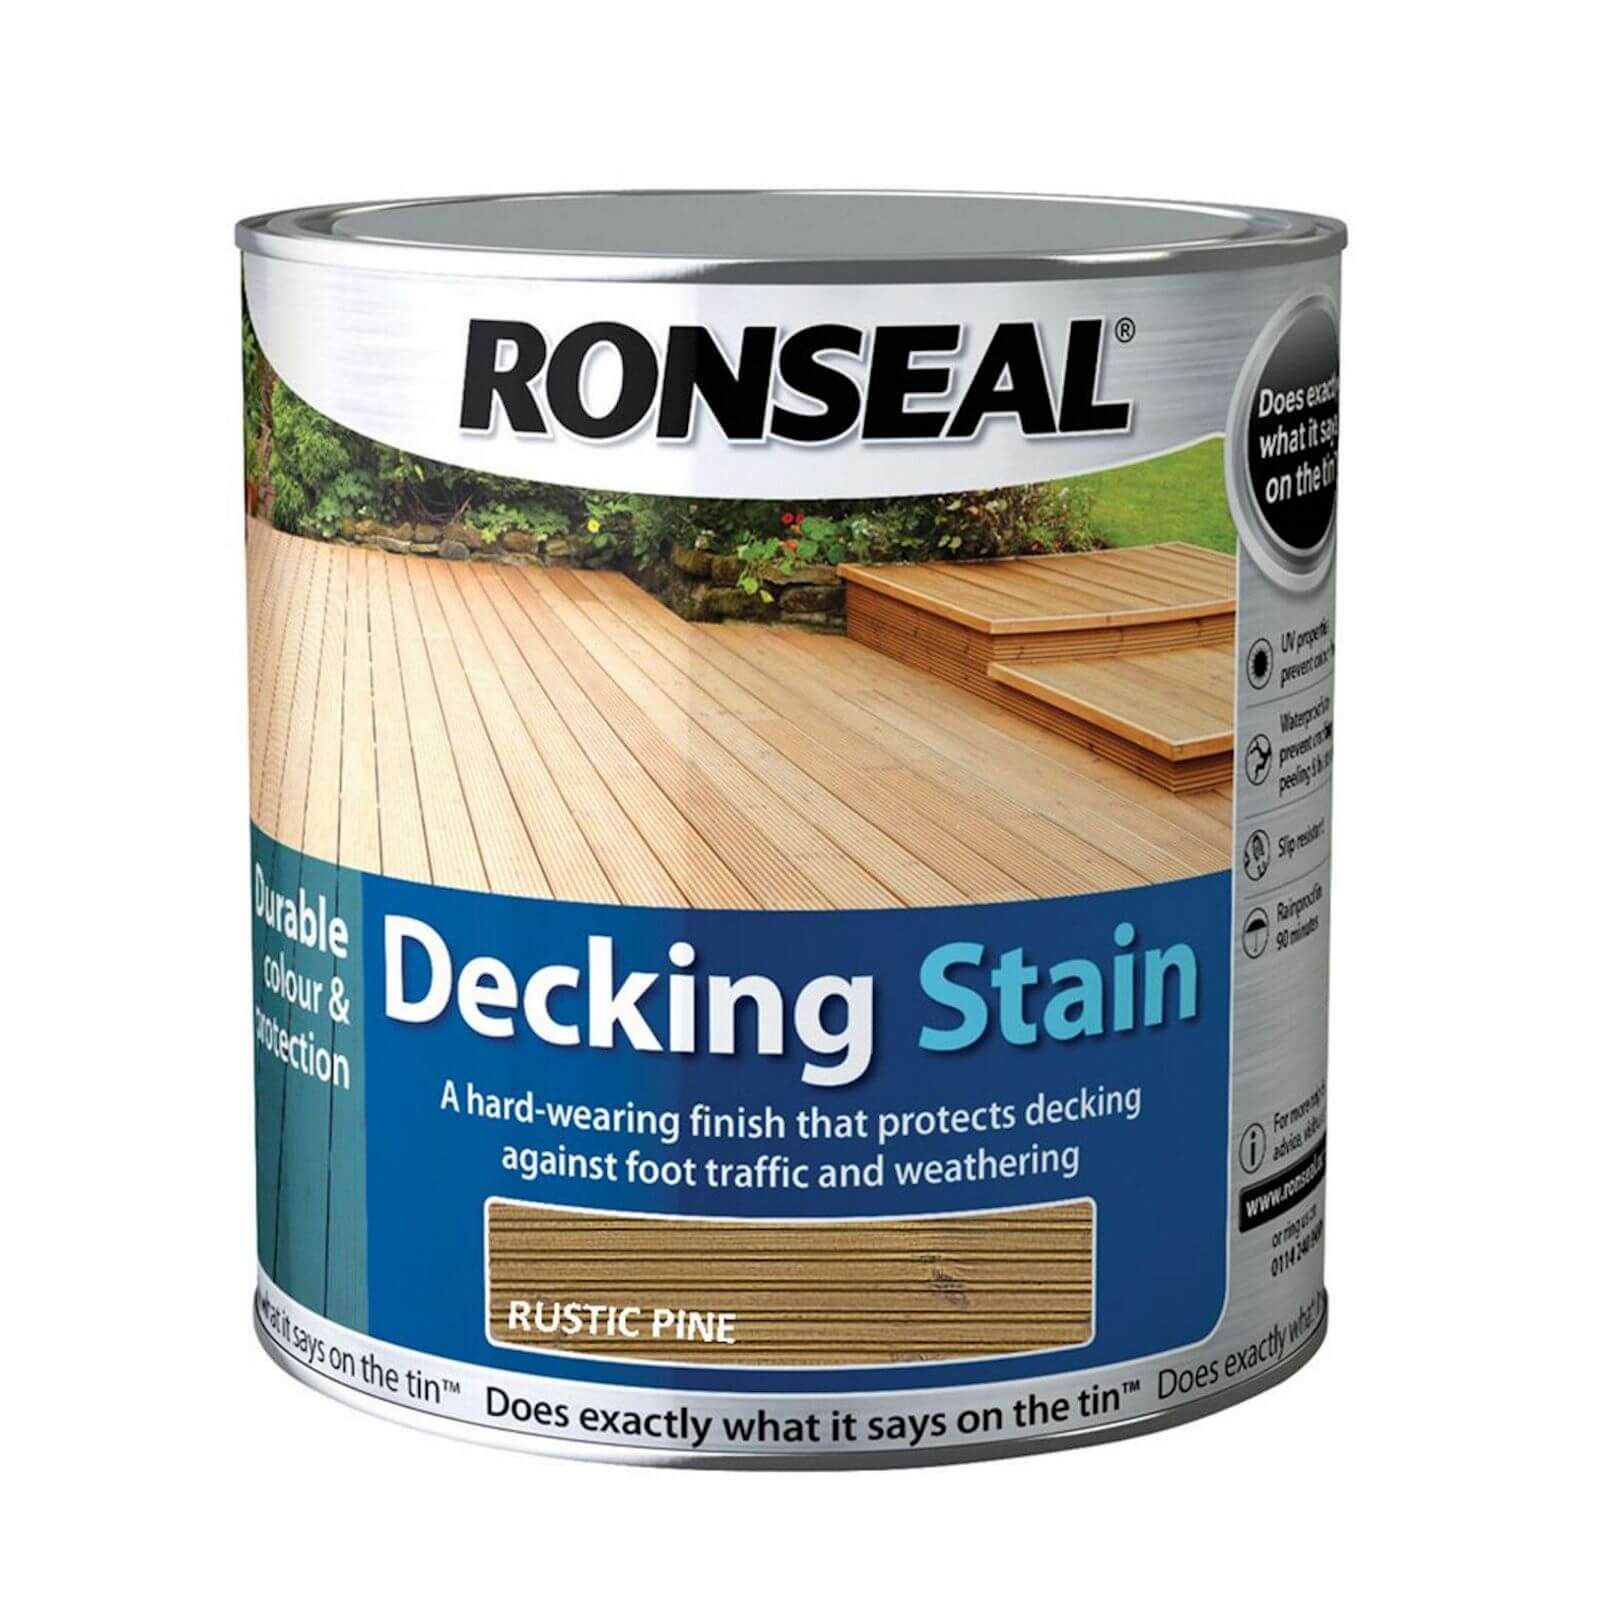 Ronseal Decking Stain Rustic Pine - 2.5L